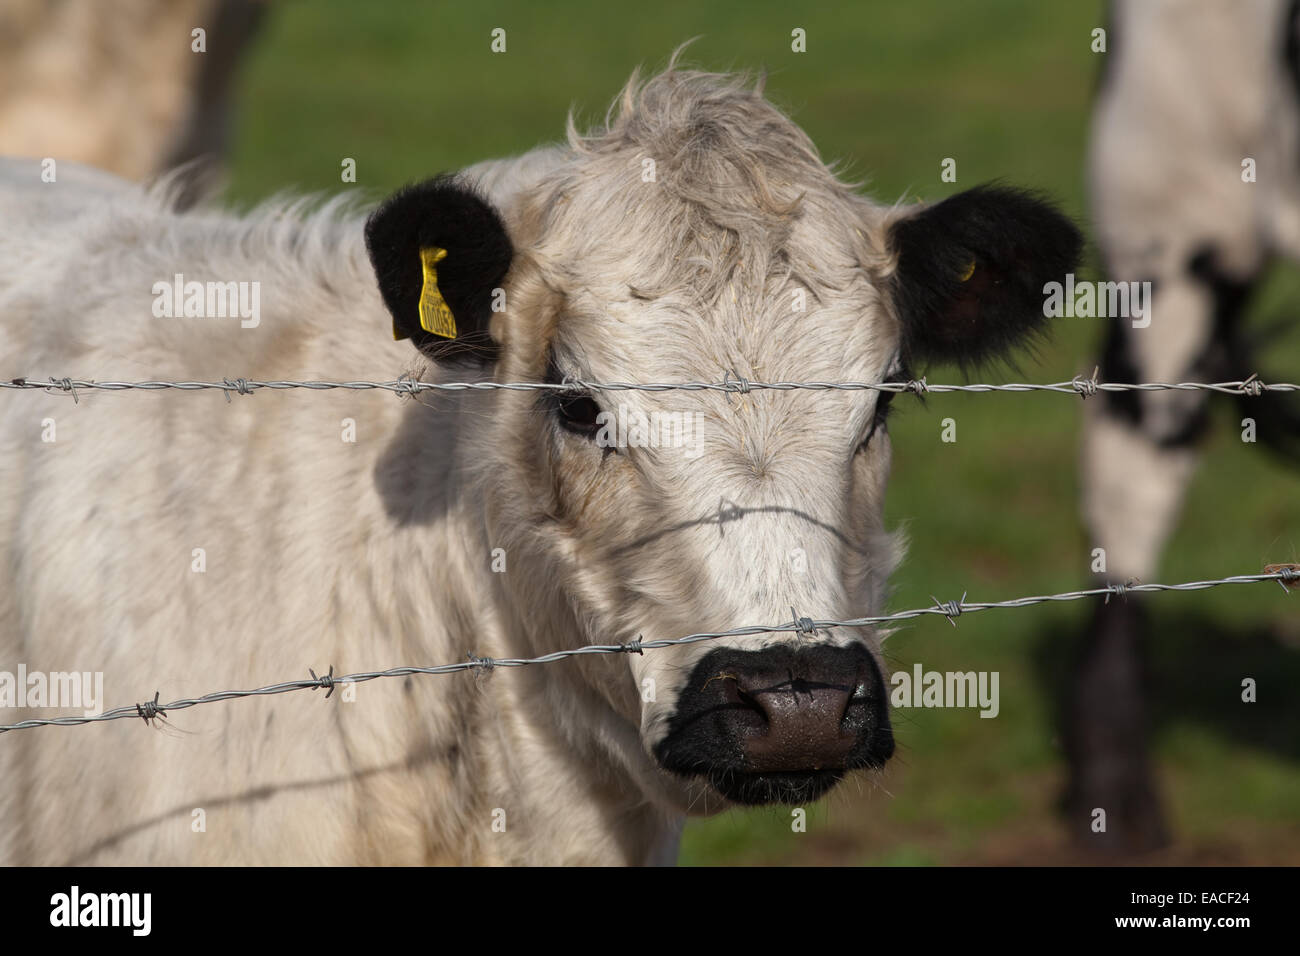 White Park Cow (Bos taurus).  Domestic cattle. Polled, - horns removed. Behind barbed wire fence line. Stock Photo